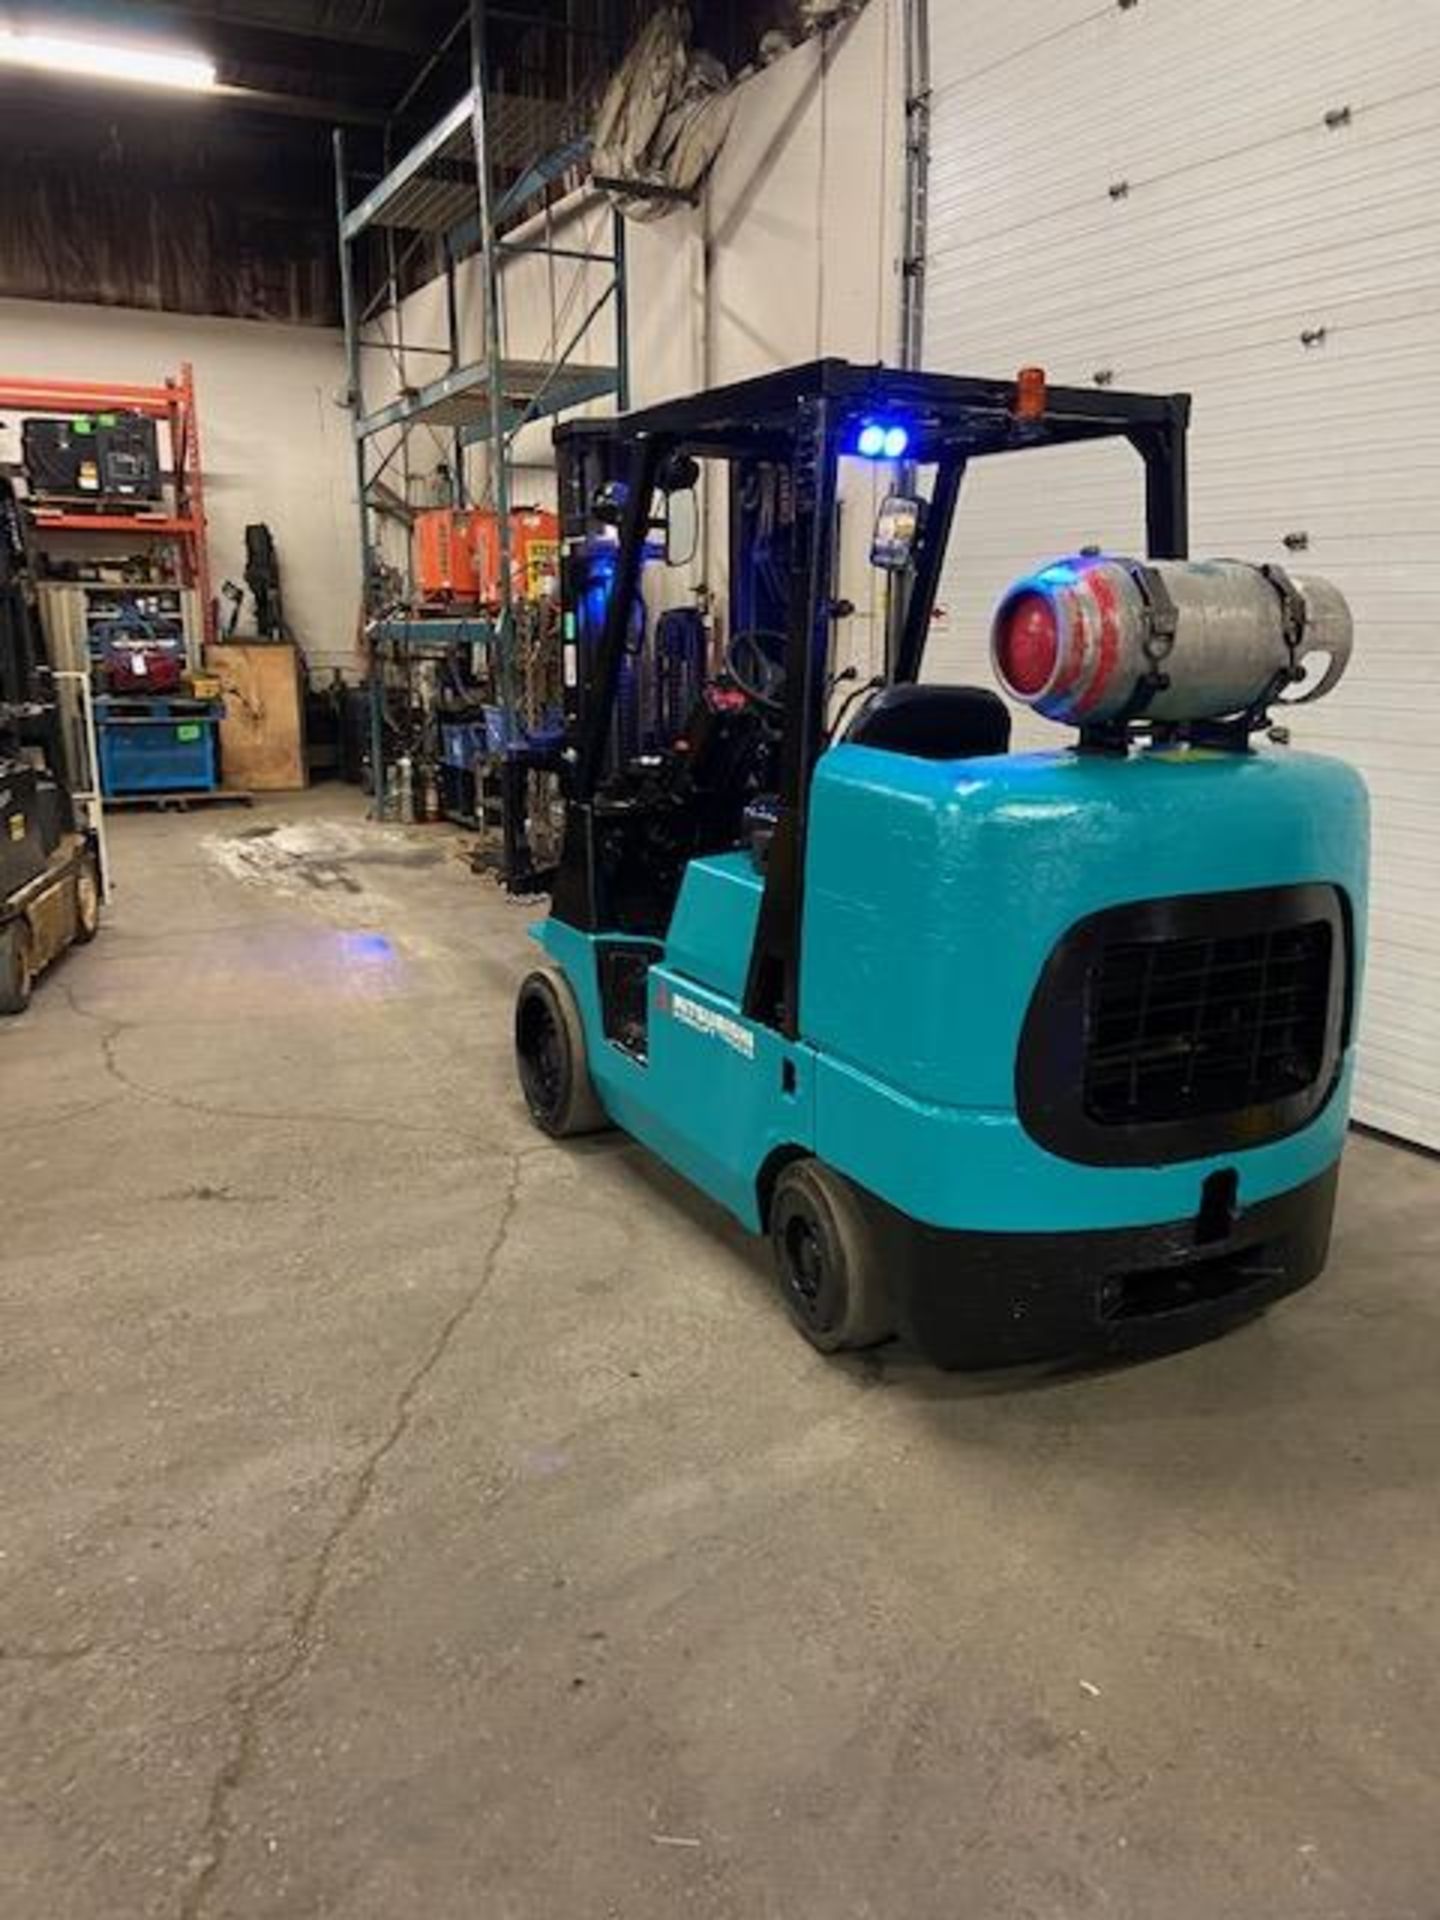 FREE CUSTOMS - Mitsubishi 10000lbs capacity LPG (propane) Forklift with 3-stage mast and sideshift - Image 3 of 3